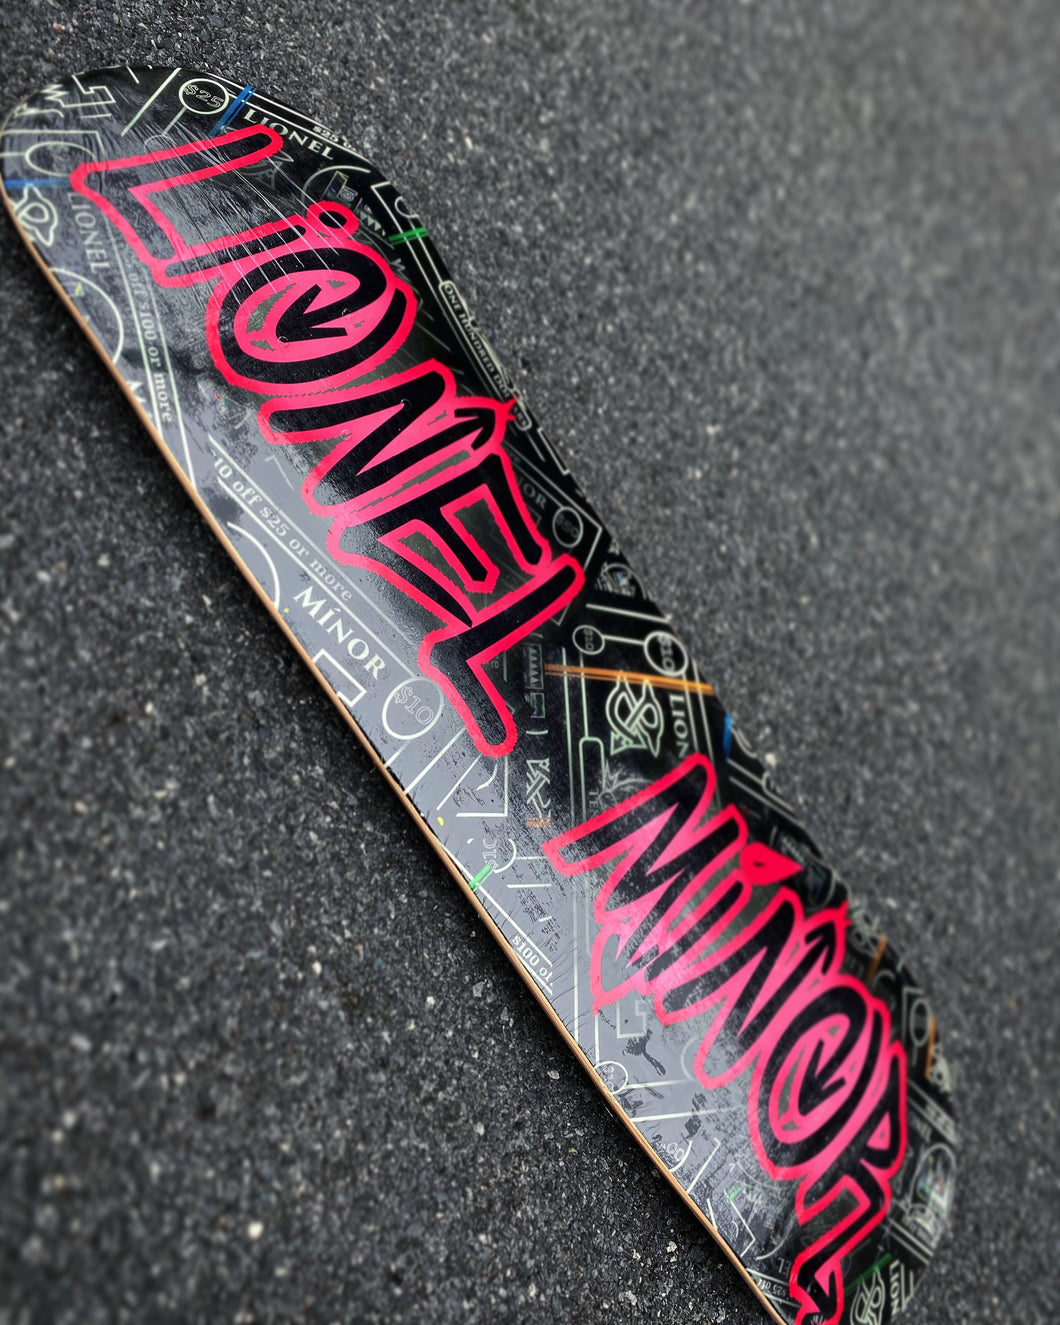 LM (Fiat) Exclusive 1 of 1 skate deck